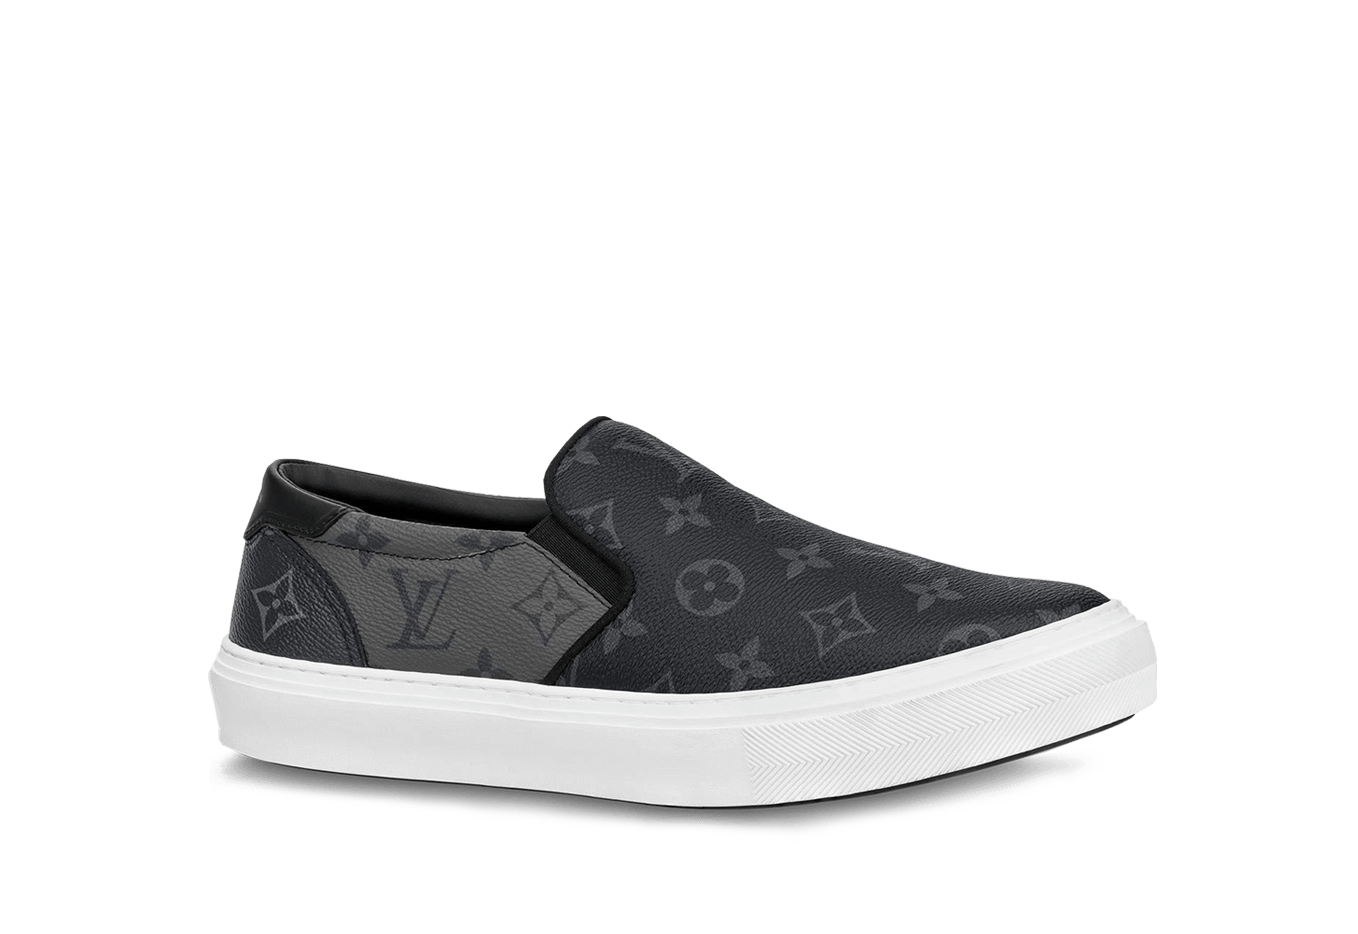 buy real Louis Vuitton     Trocadero Slip On Black for 295 USD only